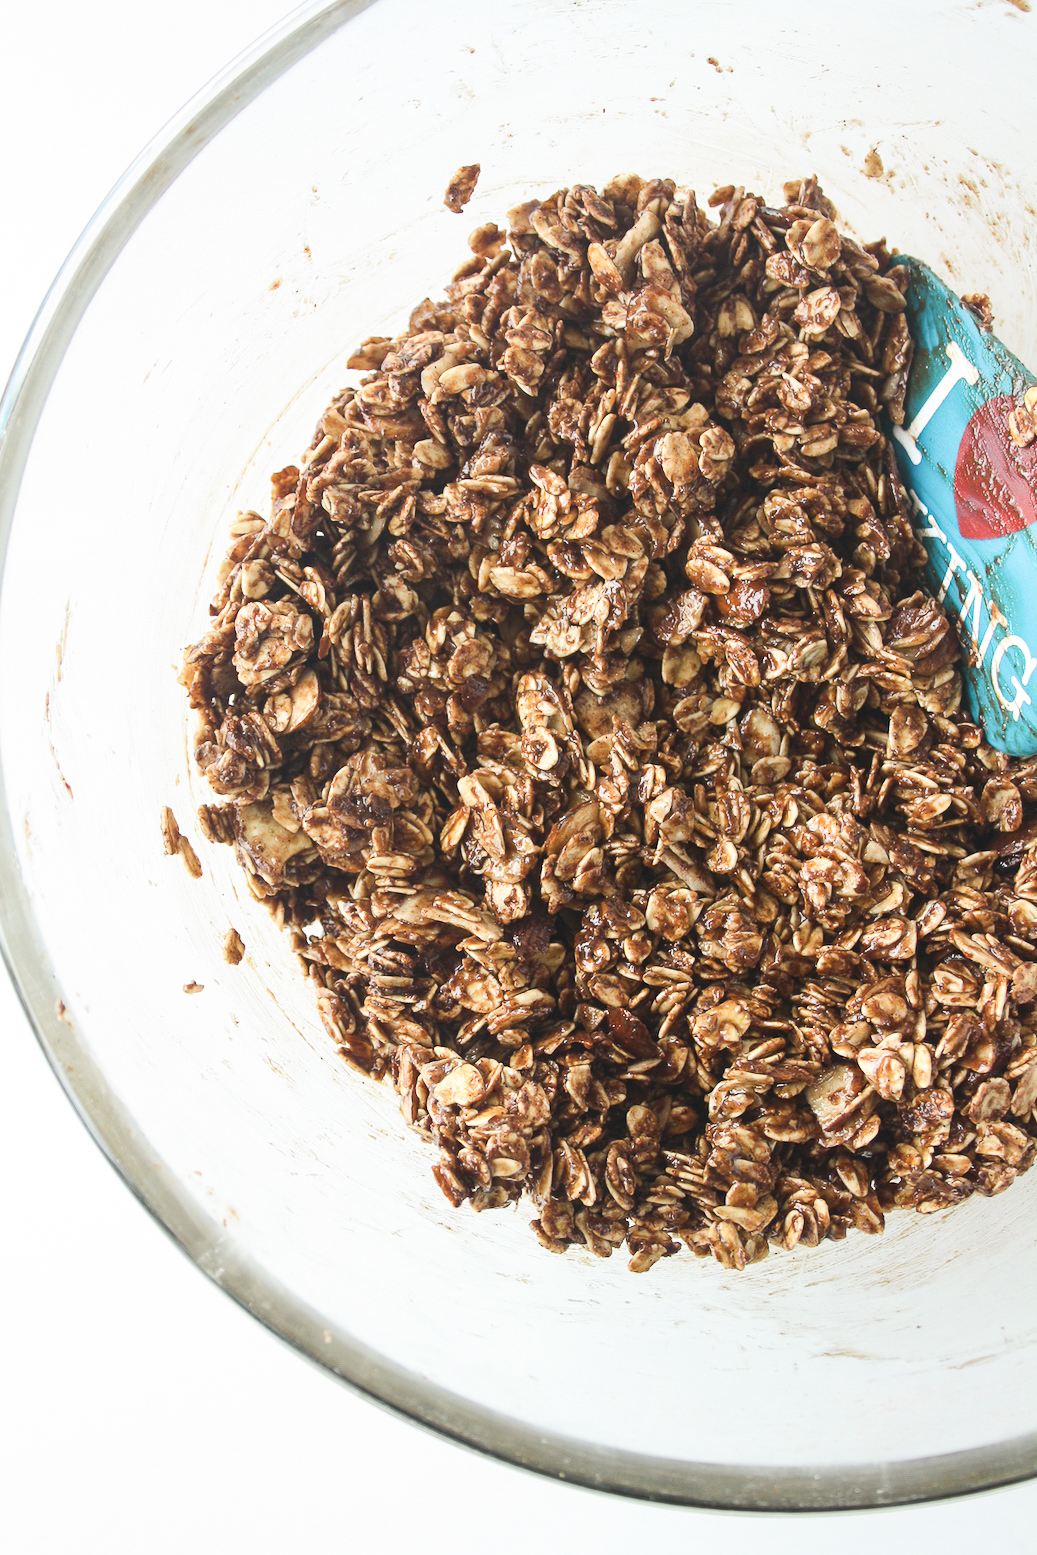 Crispy, chocolate granola with peanut butter and almonds. Gluten-free and easily vegan!